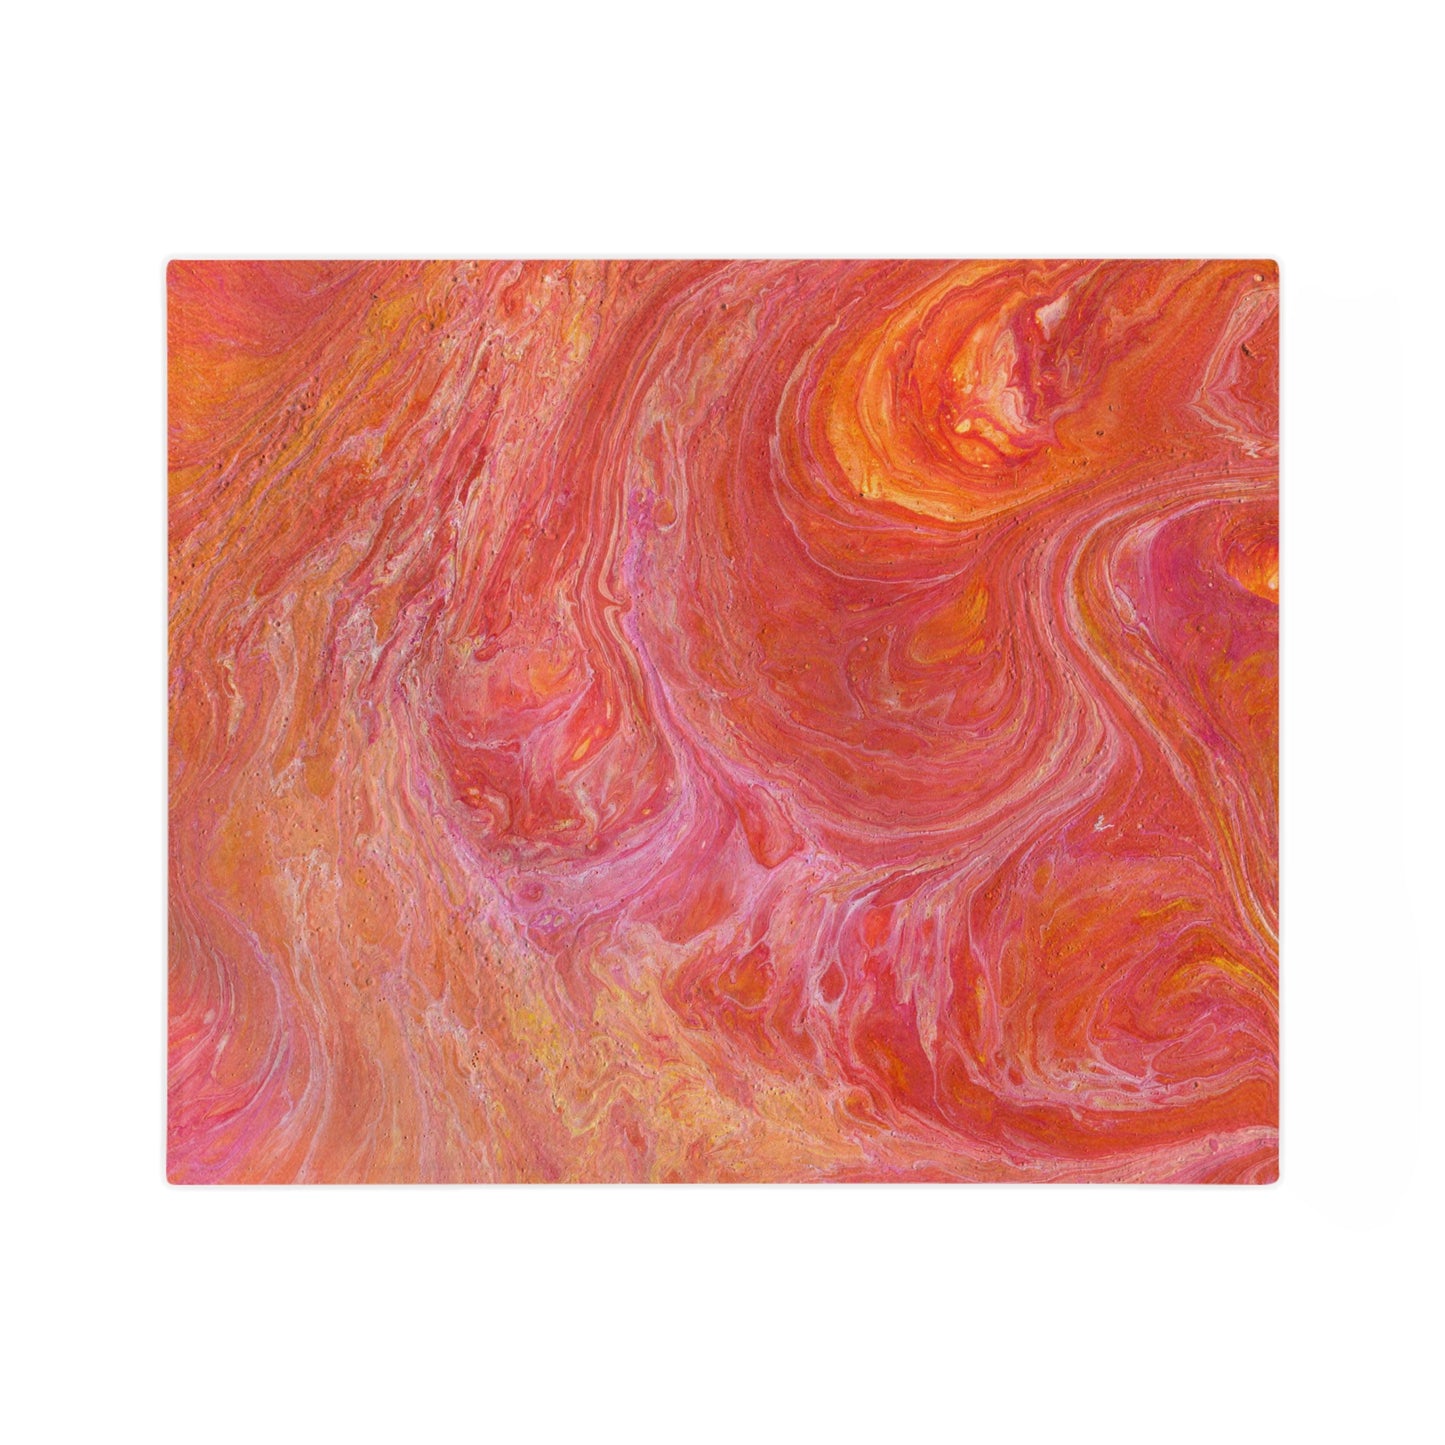 Orange Pink Hues Acrylic Fluid Pattern Style Throw Sofa Bed Blanket - Soft Thick Velveteen Minky Throw Blanket